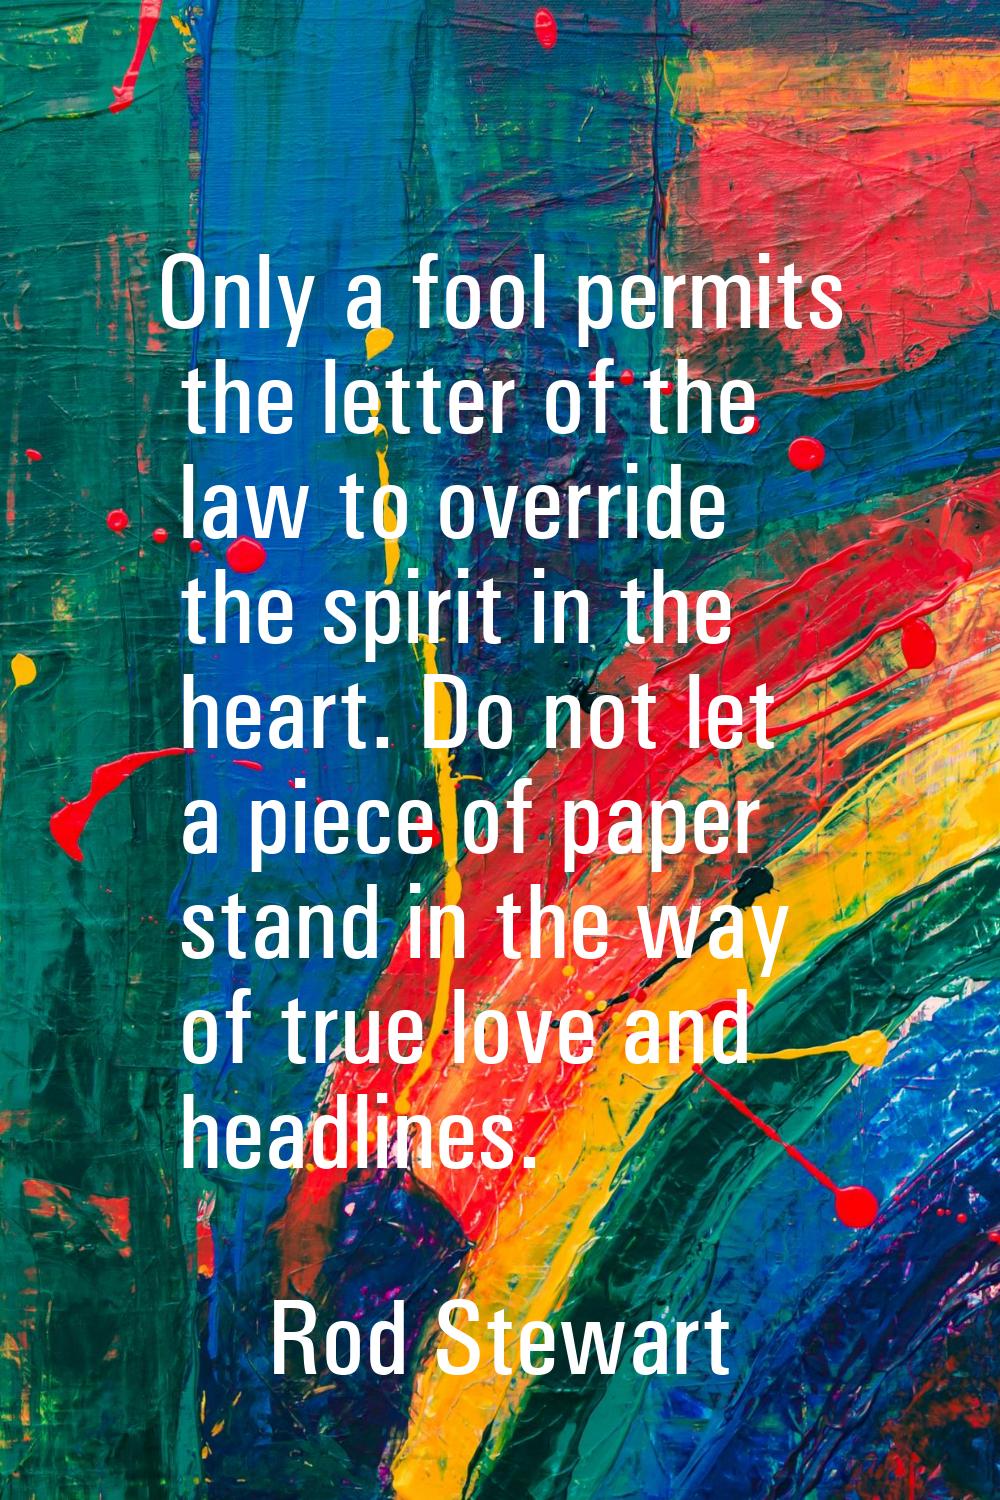 Only a fool permits the letter of the law to override the spirit in the heart. Do not let a piece o